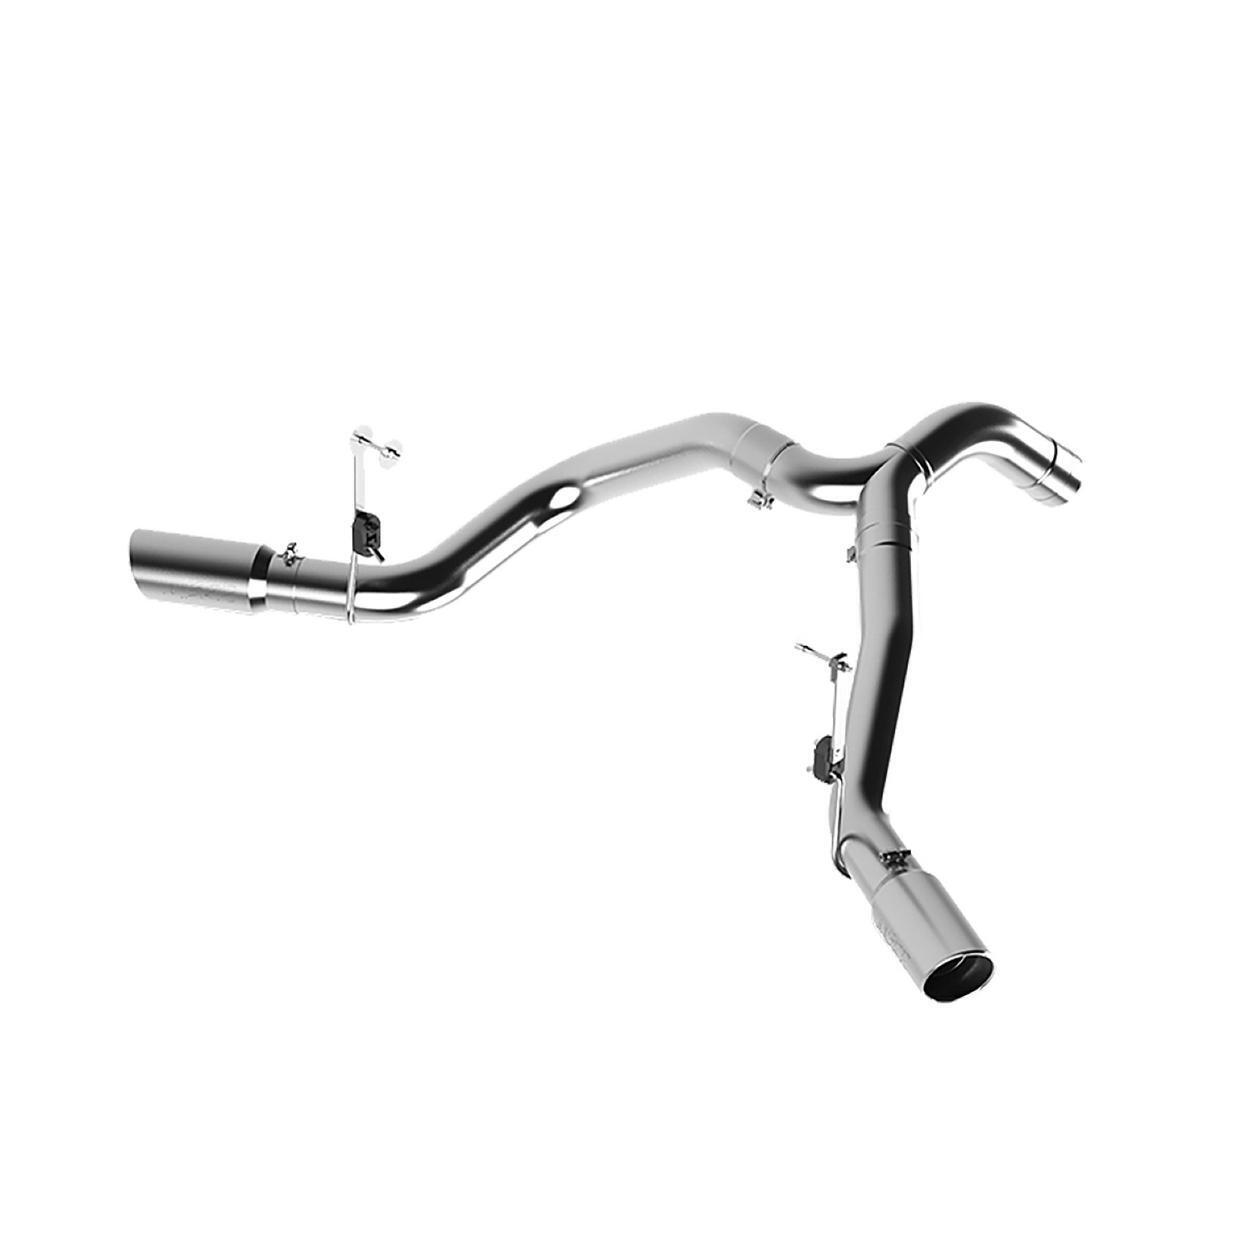 Exhaust System Kit for 2020 Ram 3500